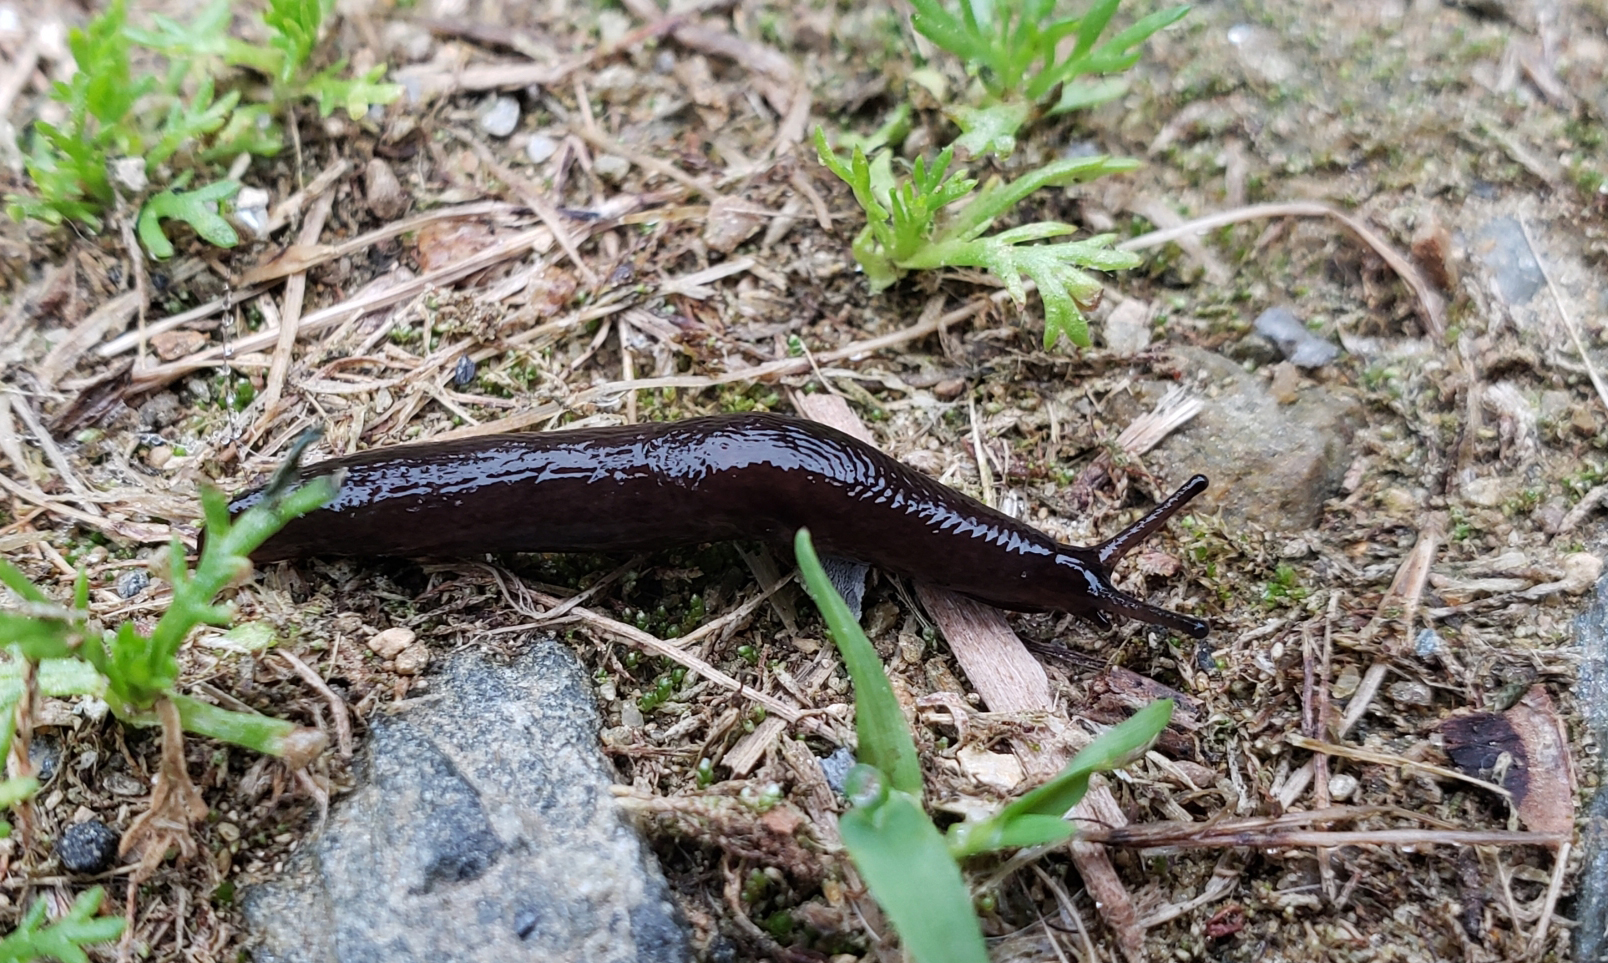 A black-colored slug crosses the ground with a few green stems surrounding it.